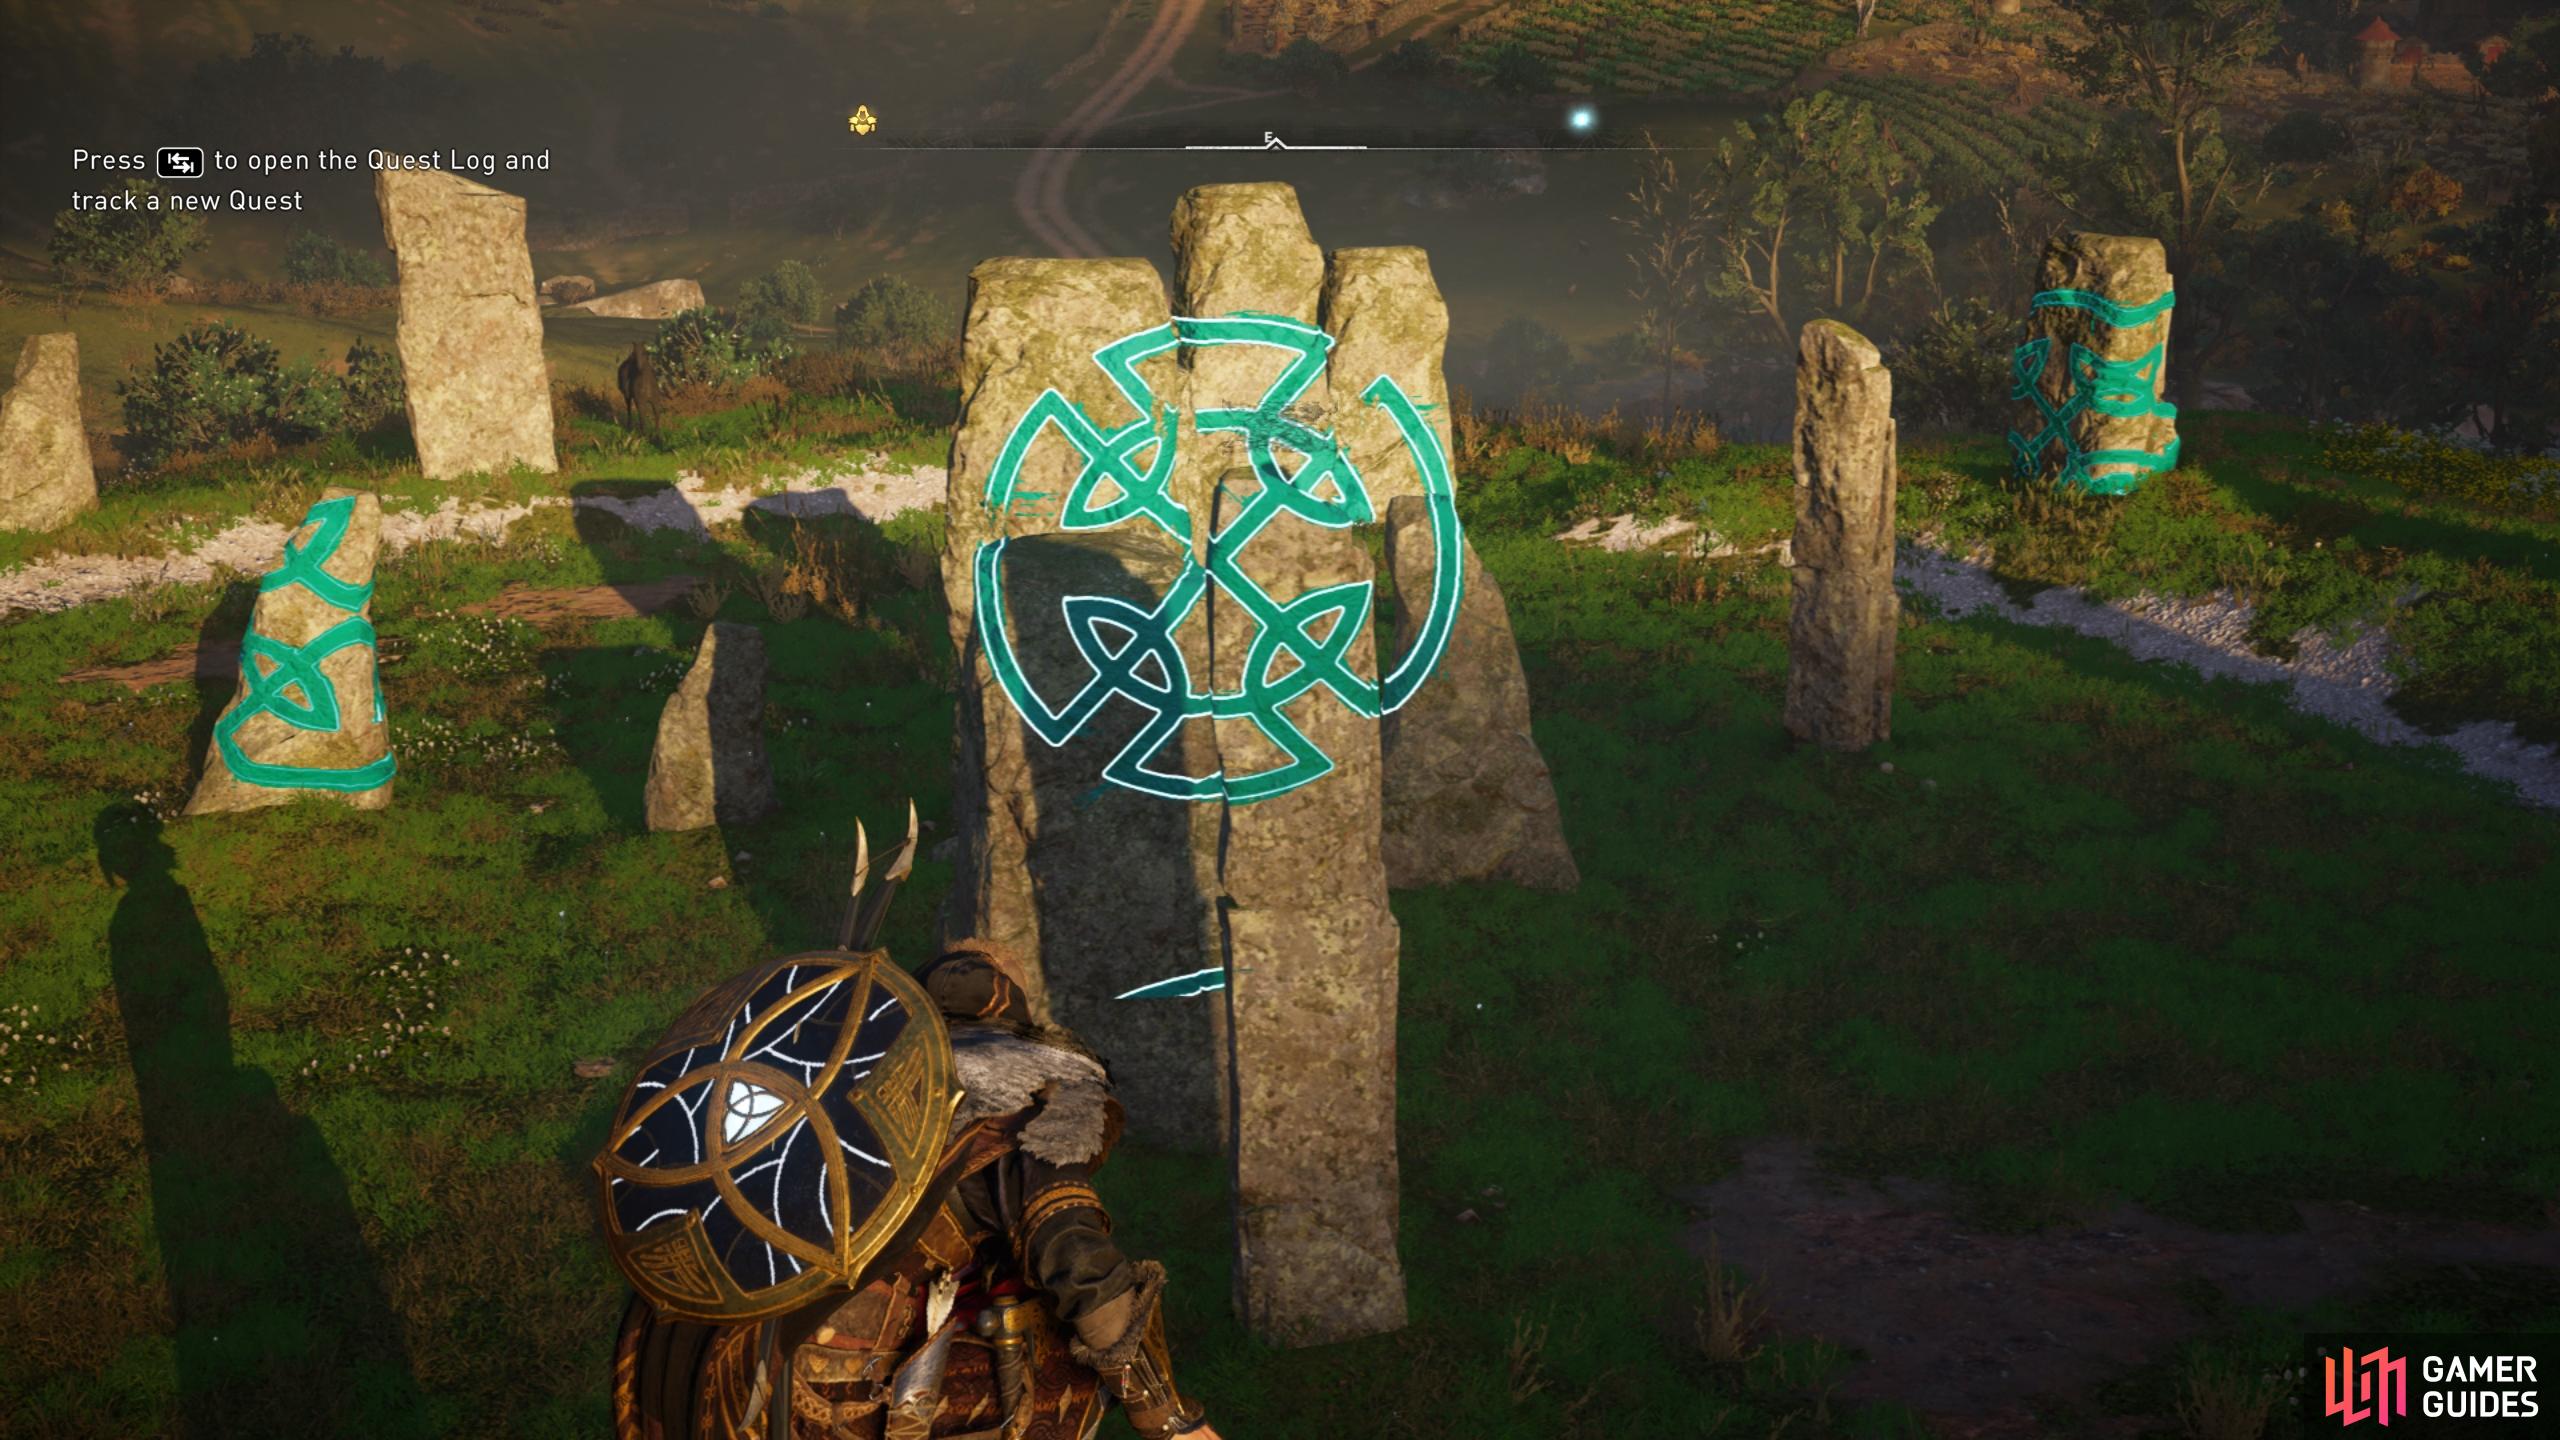 Once youre atop the stone, face east and move your camera until the symbol aligns.